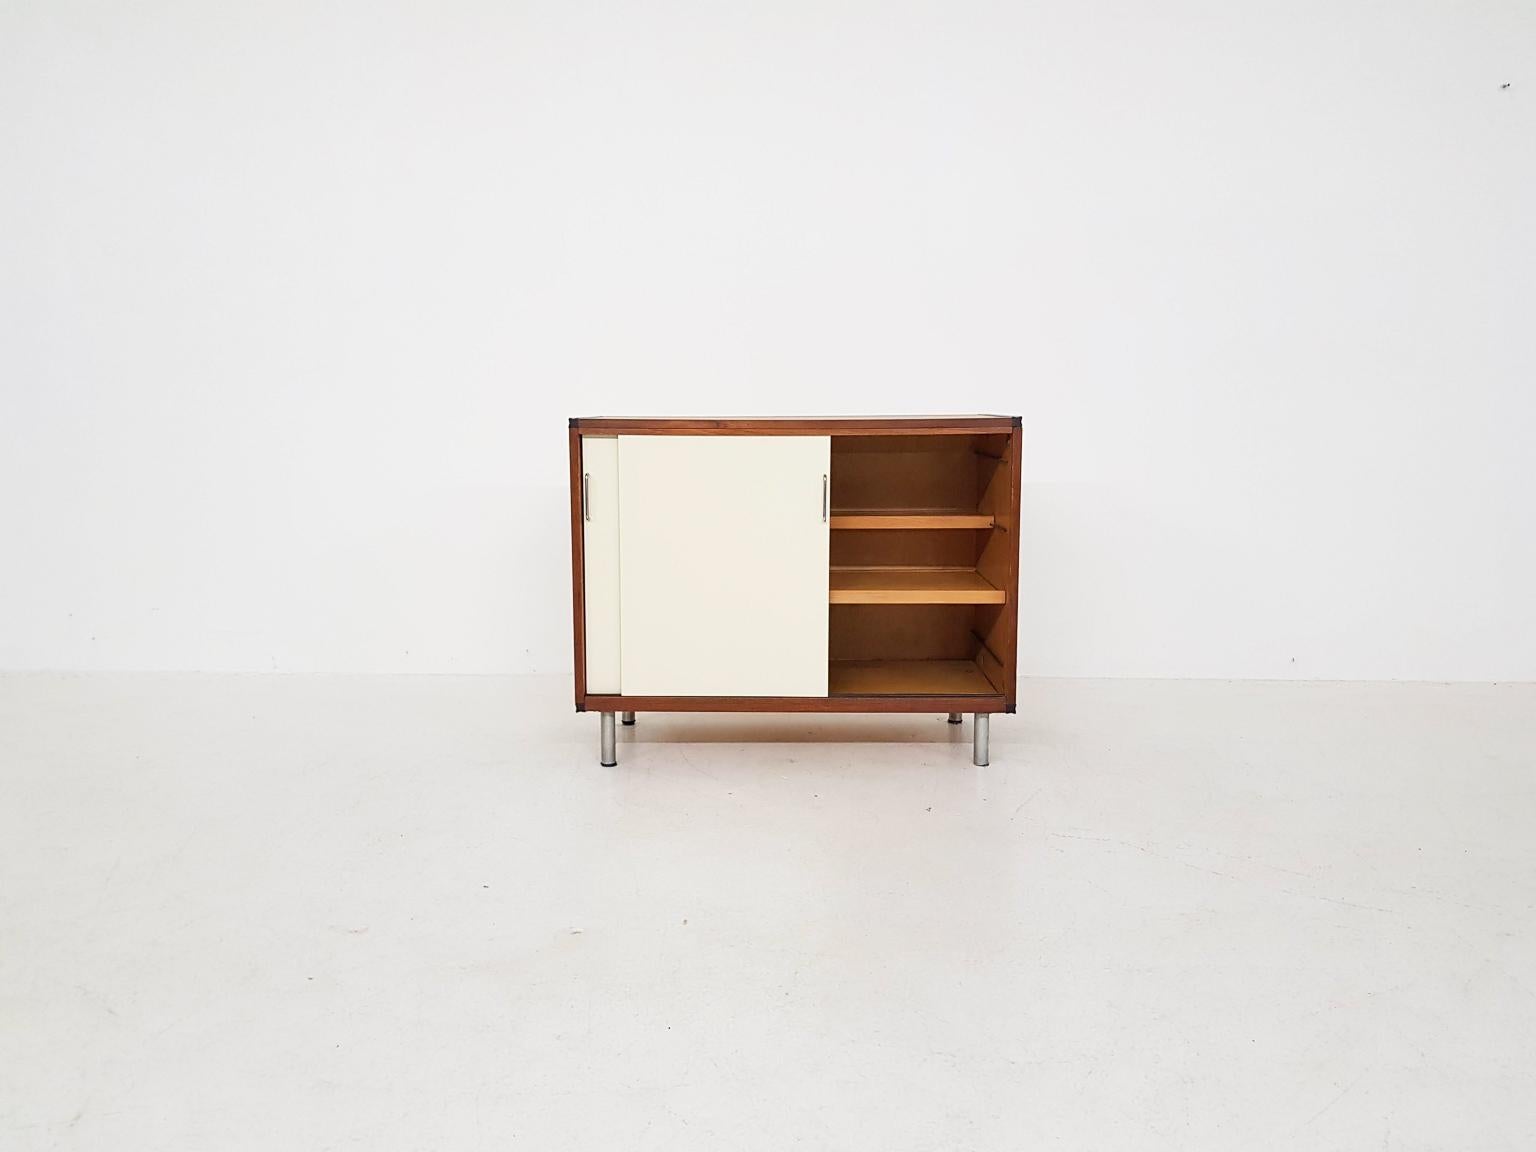 Small teak credenza with white sliding doors by Dutch designer Cees Braakman for U.M.S. Pastoe, made in the Netherlands in the 1960s.

This credenza is part of the 